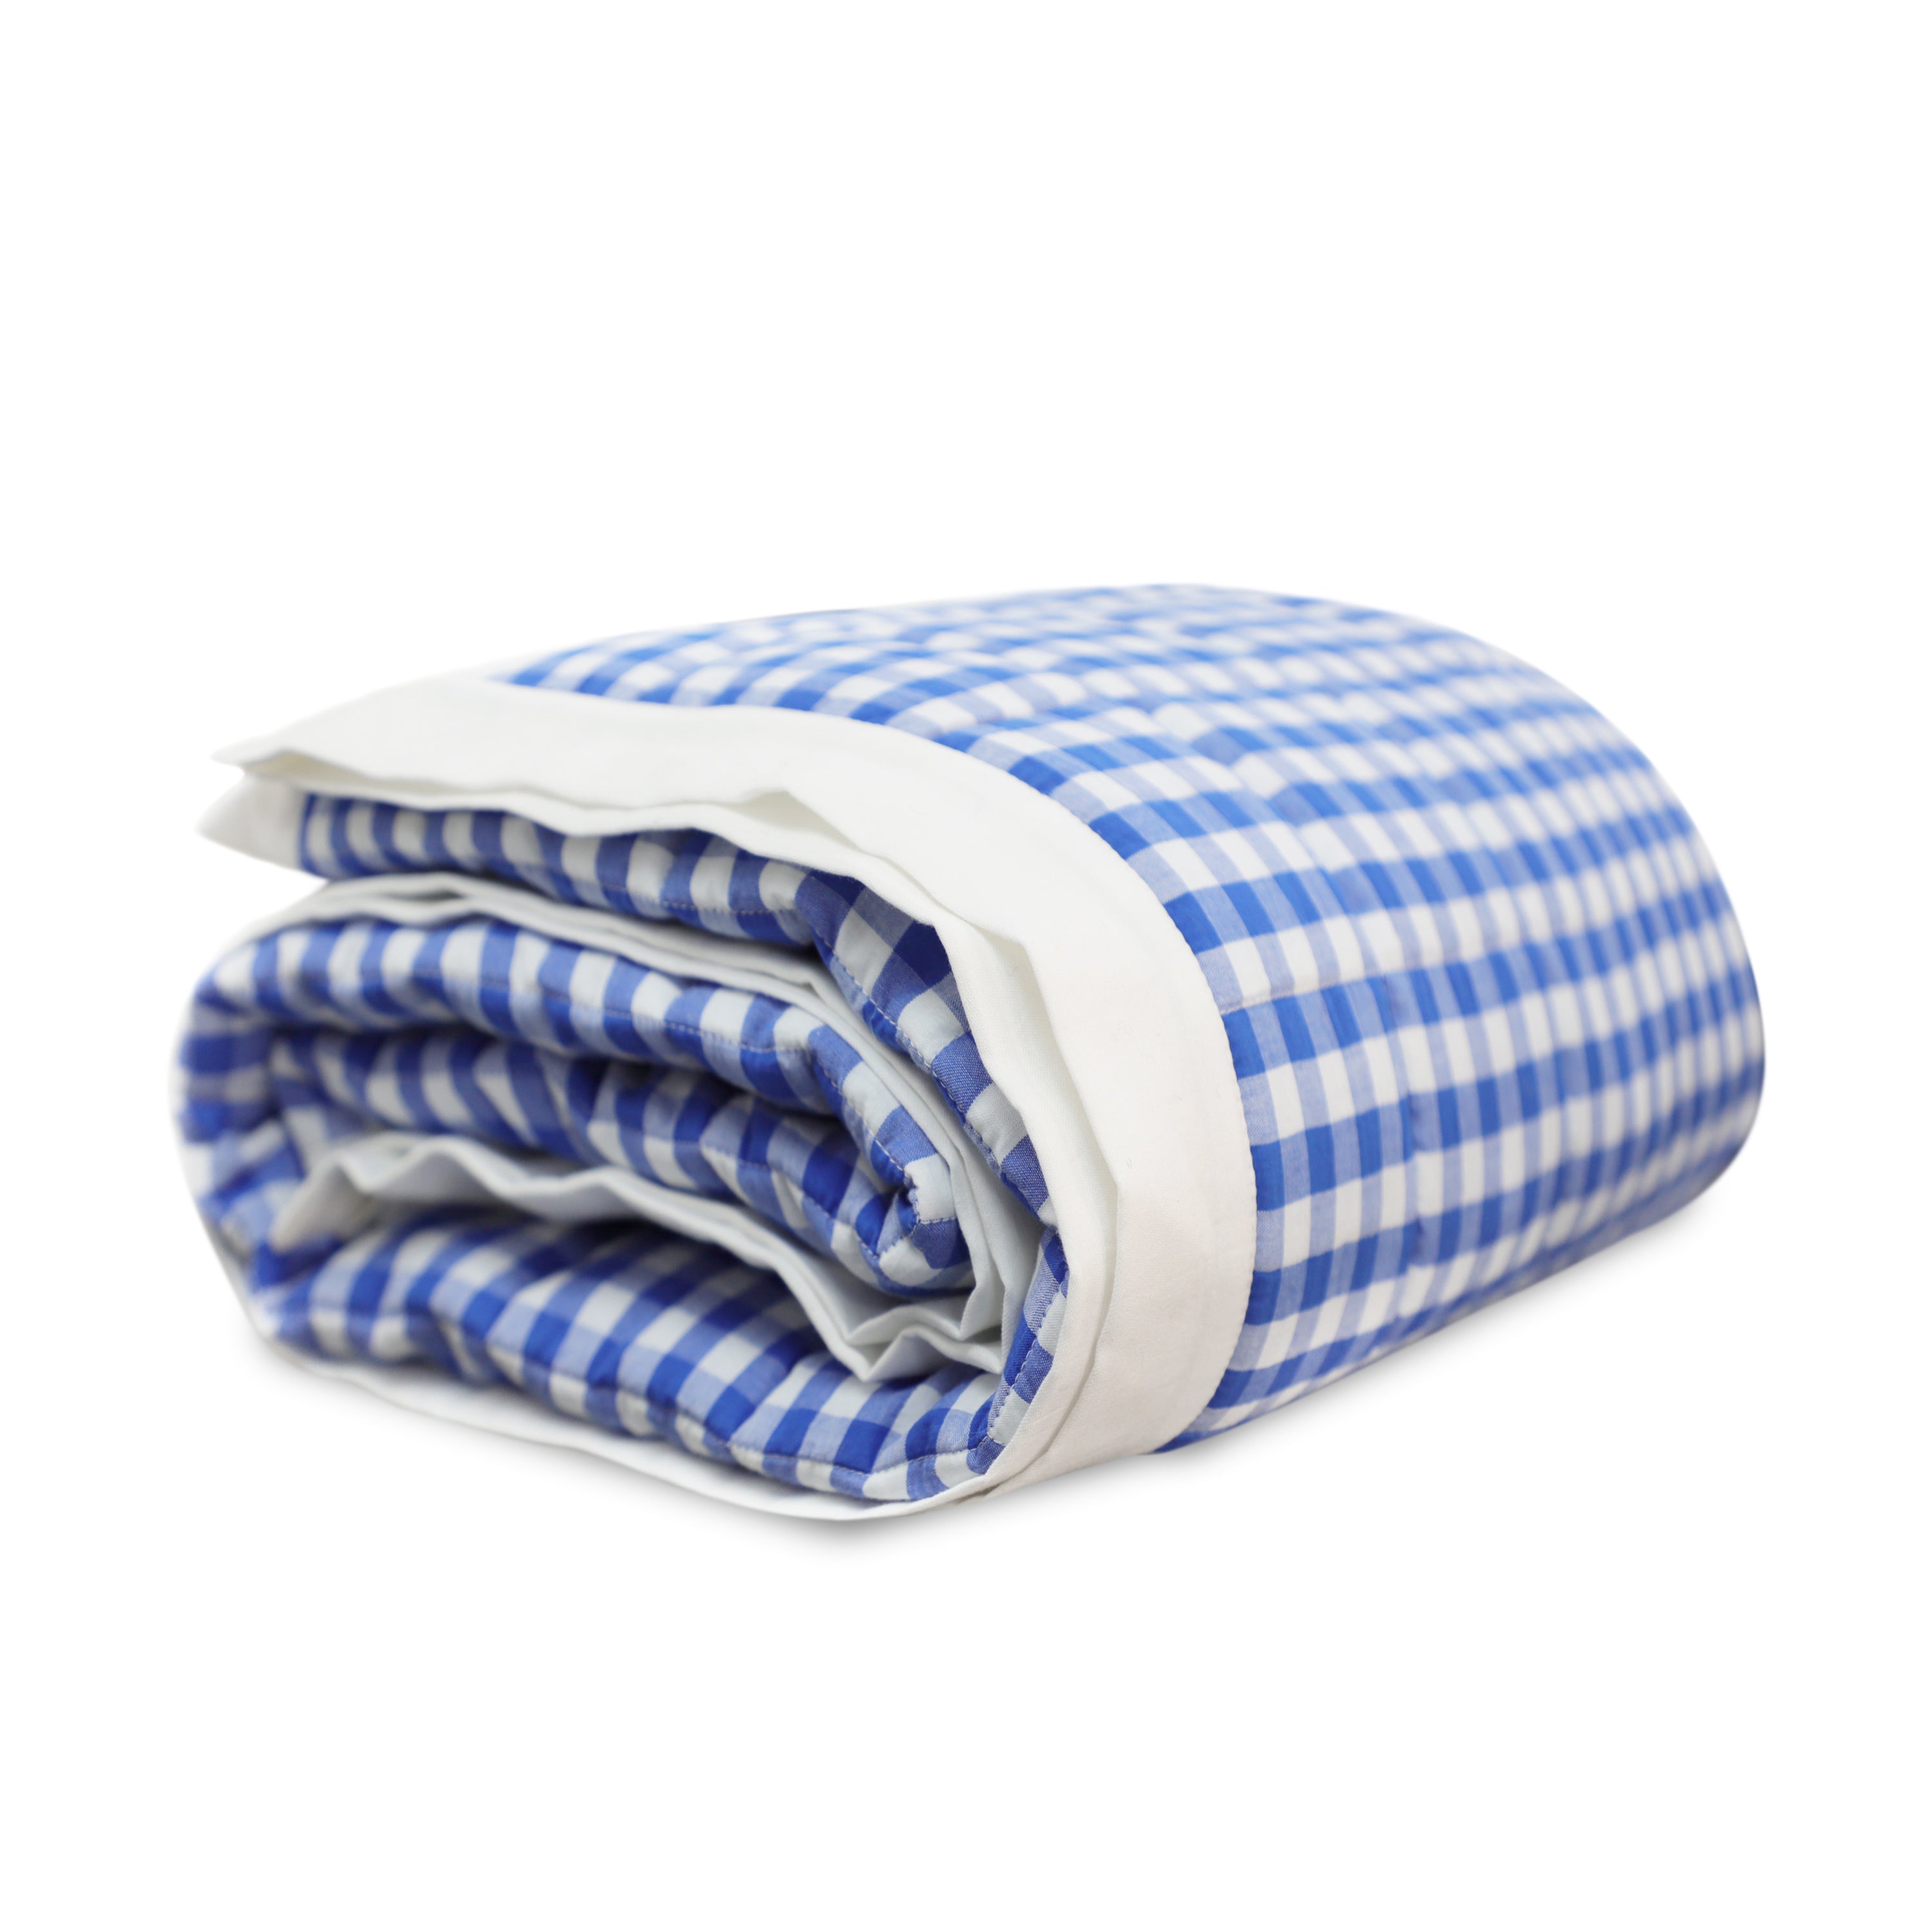 A blue and white gingham cotton quilt rolled up. The pick stitch quilt is accented with white flange on all sides.